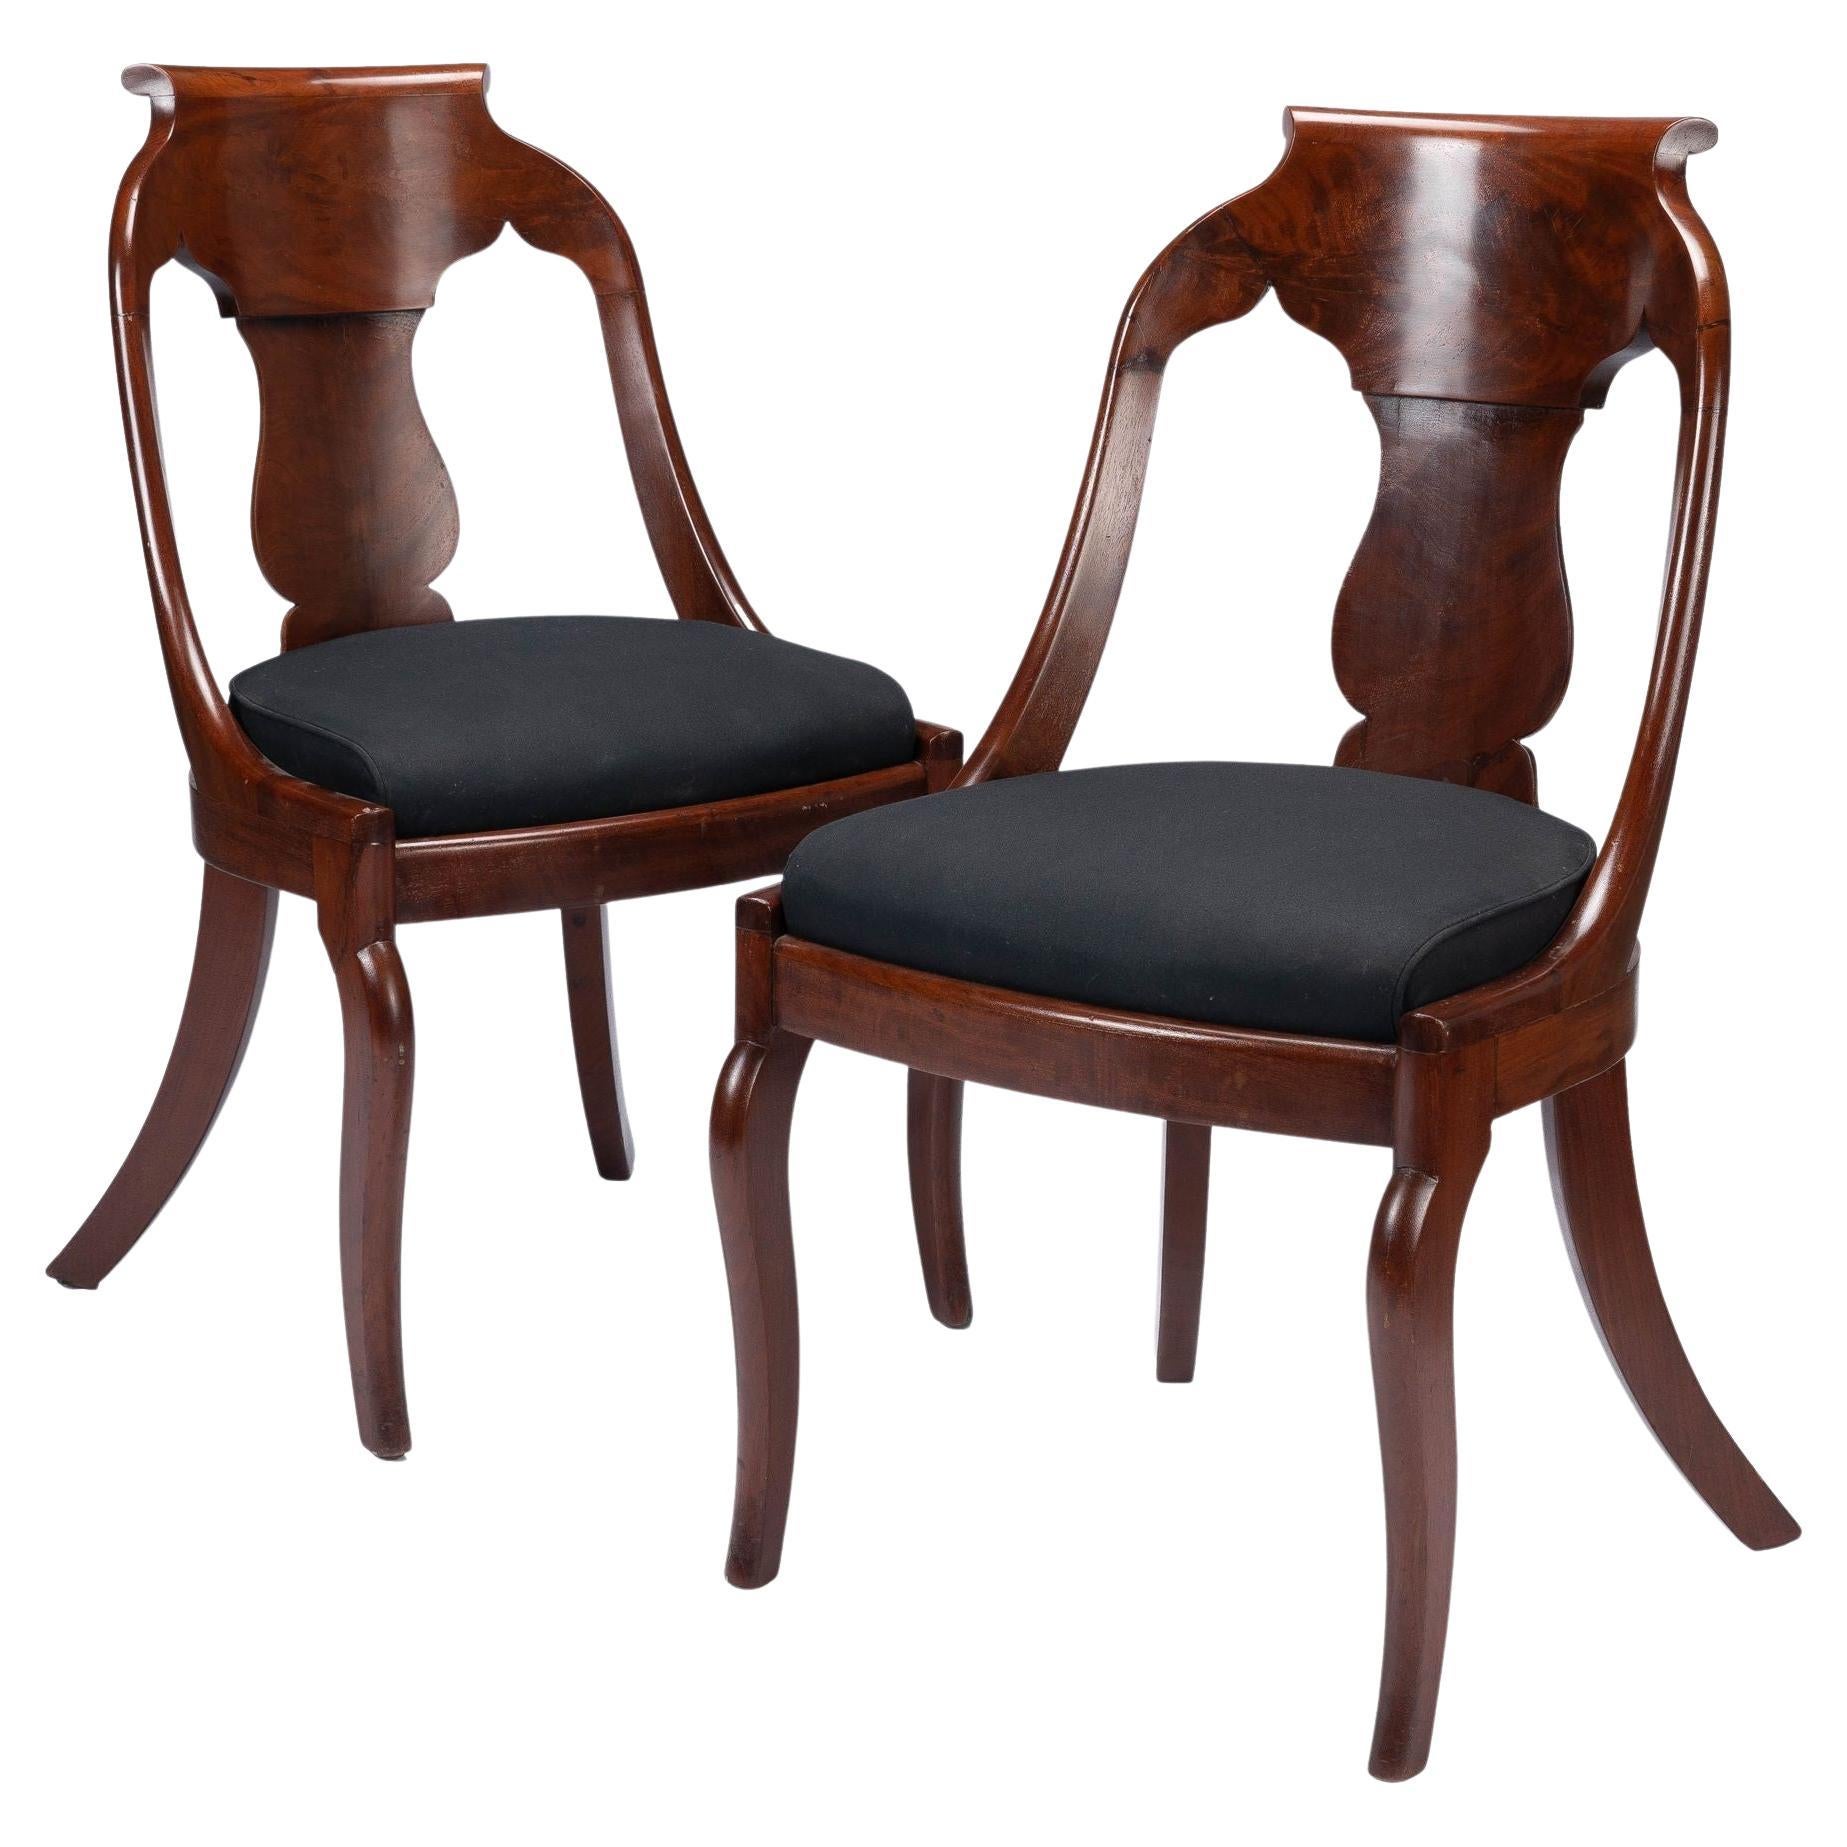 Pair of American Mahogany Upholstered Slip Seat Gondola Chairs, '1830-1935' For Sale